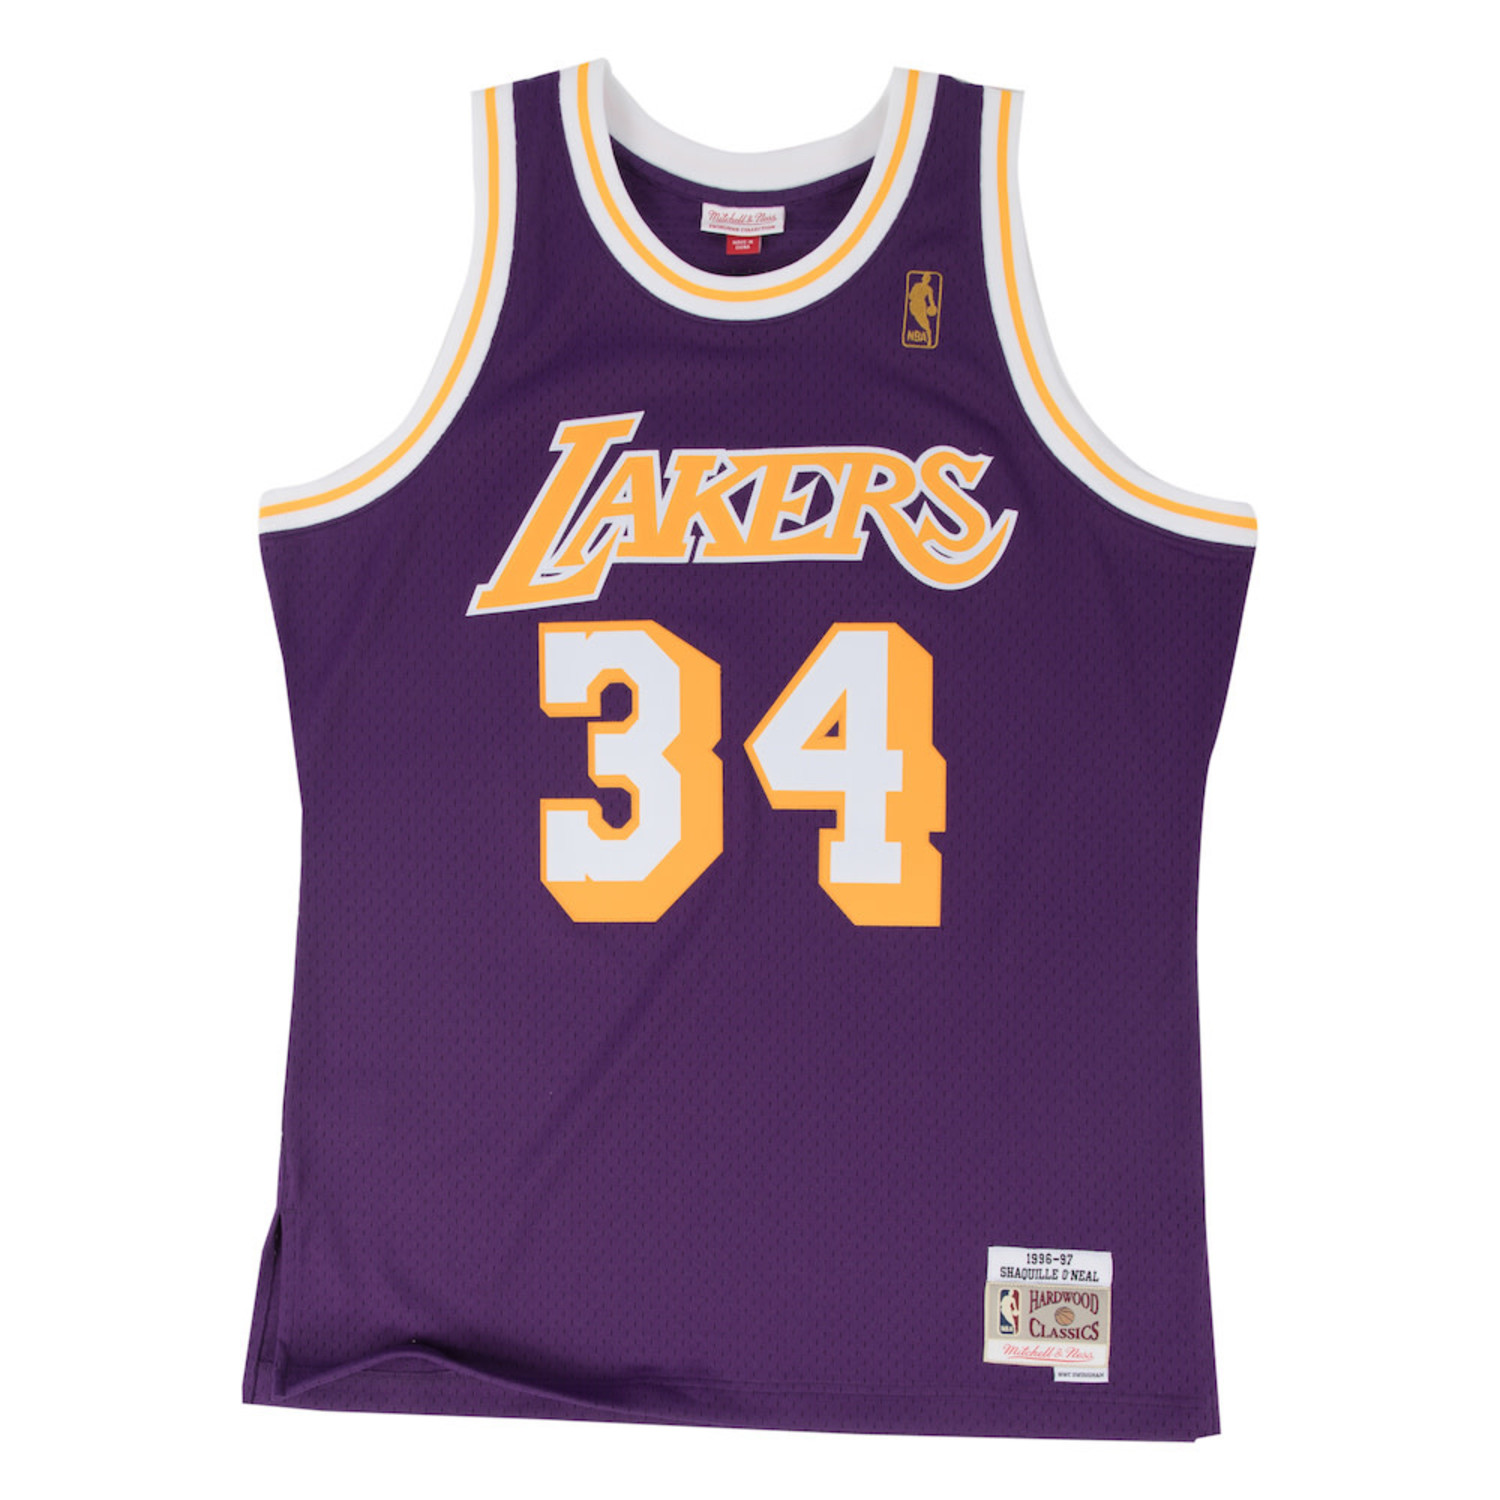 Men's Mitchell & Ness Shaquille O'Neal Purple Los Angeles Lakers Hardwood Classics 1996/97 Lunar New Year Swingman Jersey Size: Small